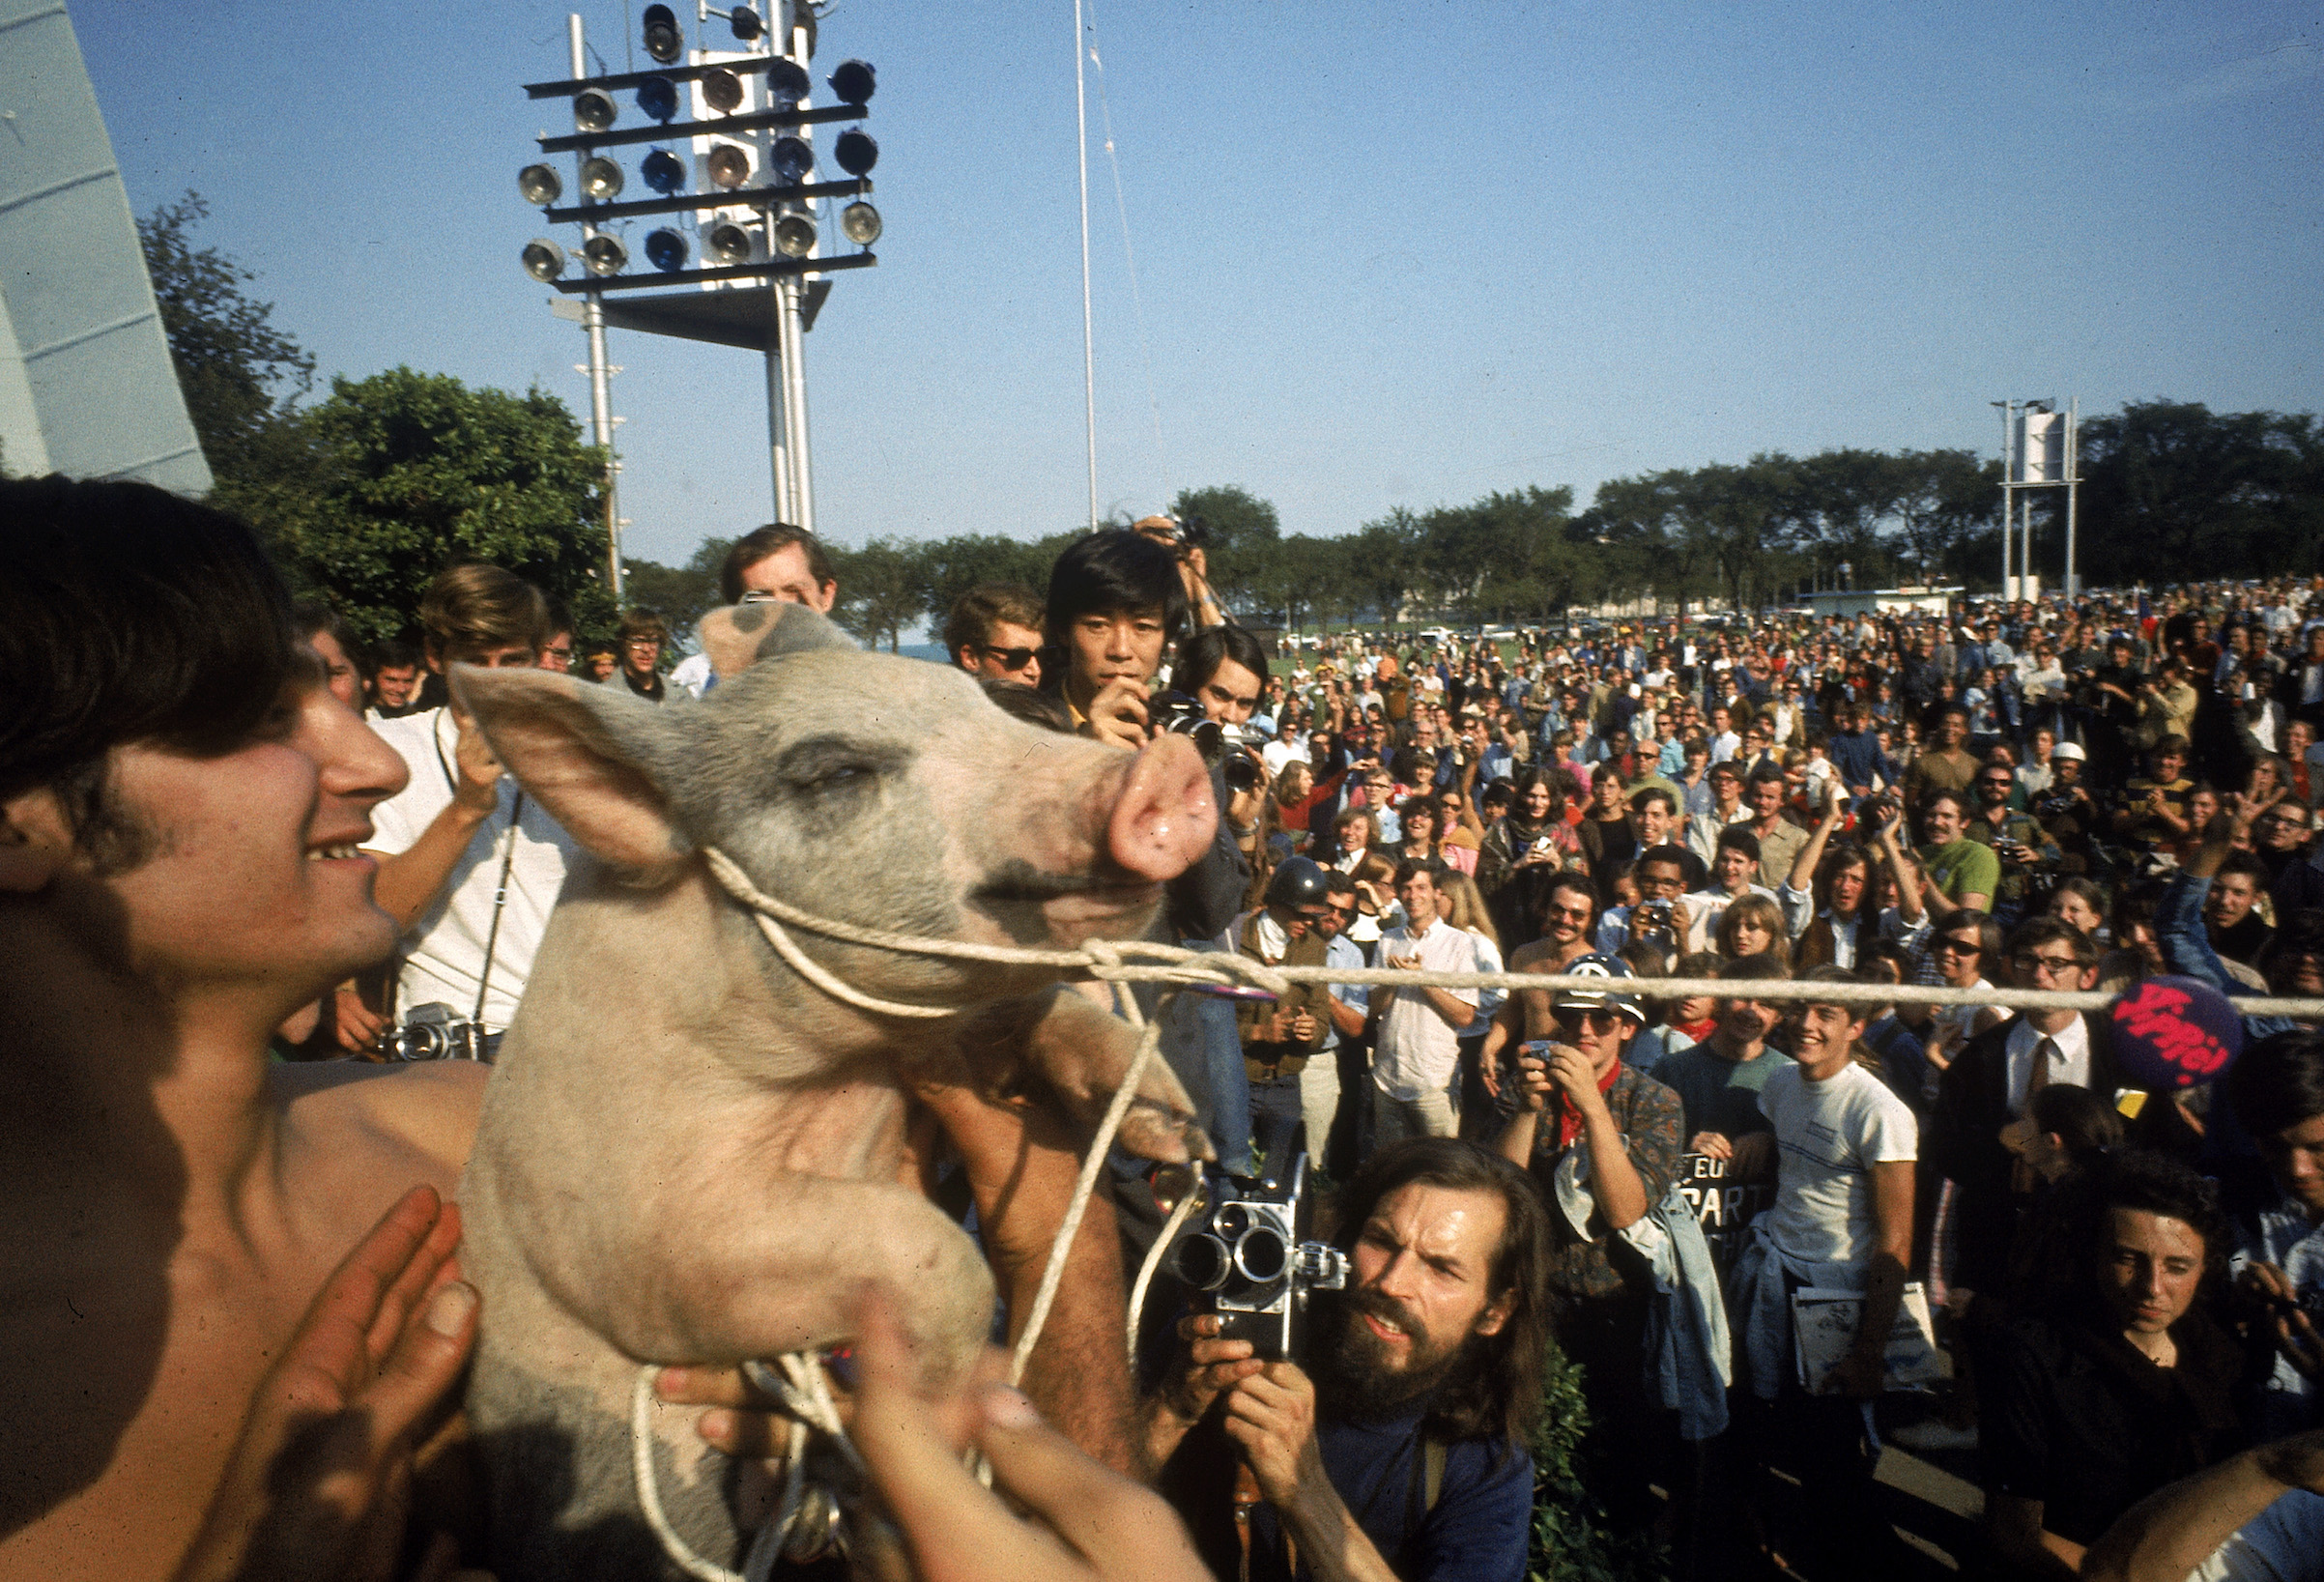 Yippies parading their Presidential candidate, Pigasus the pig, during the 1968 Democratic National Convention (Julian Wasser—The LIFE Images Collection/Getty Images)